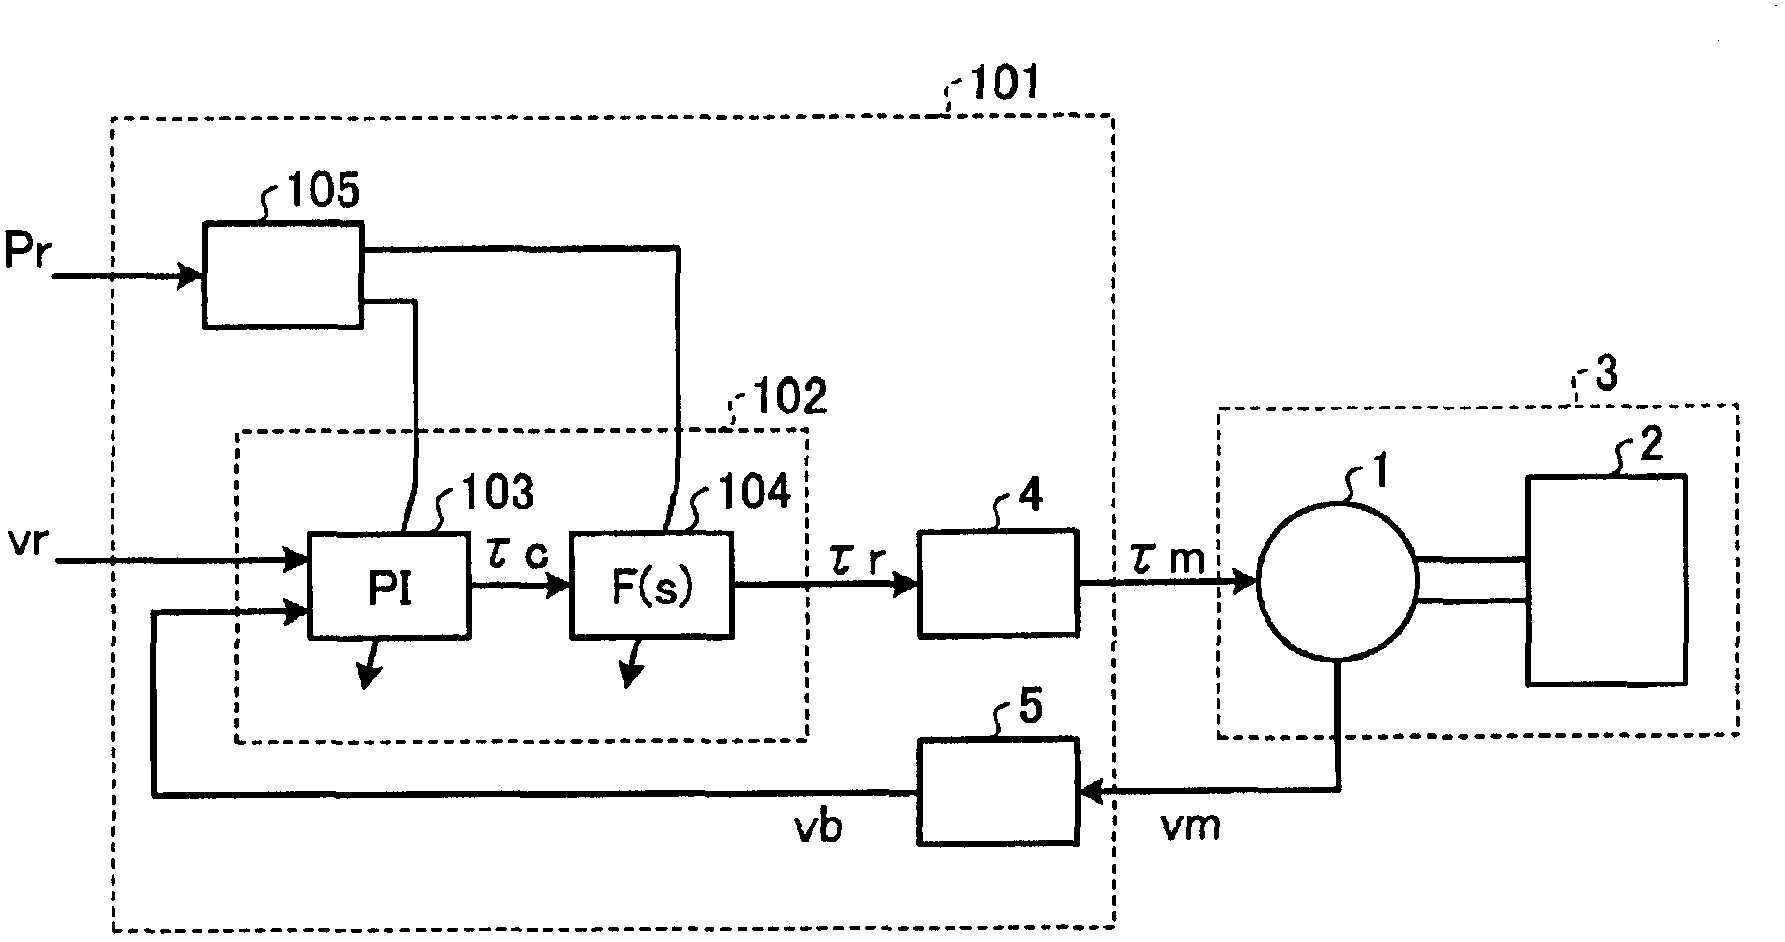 Motor controlling device